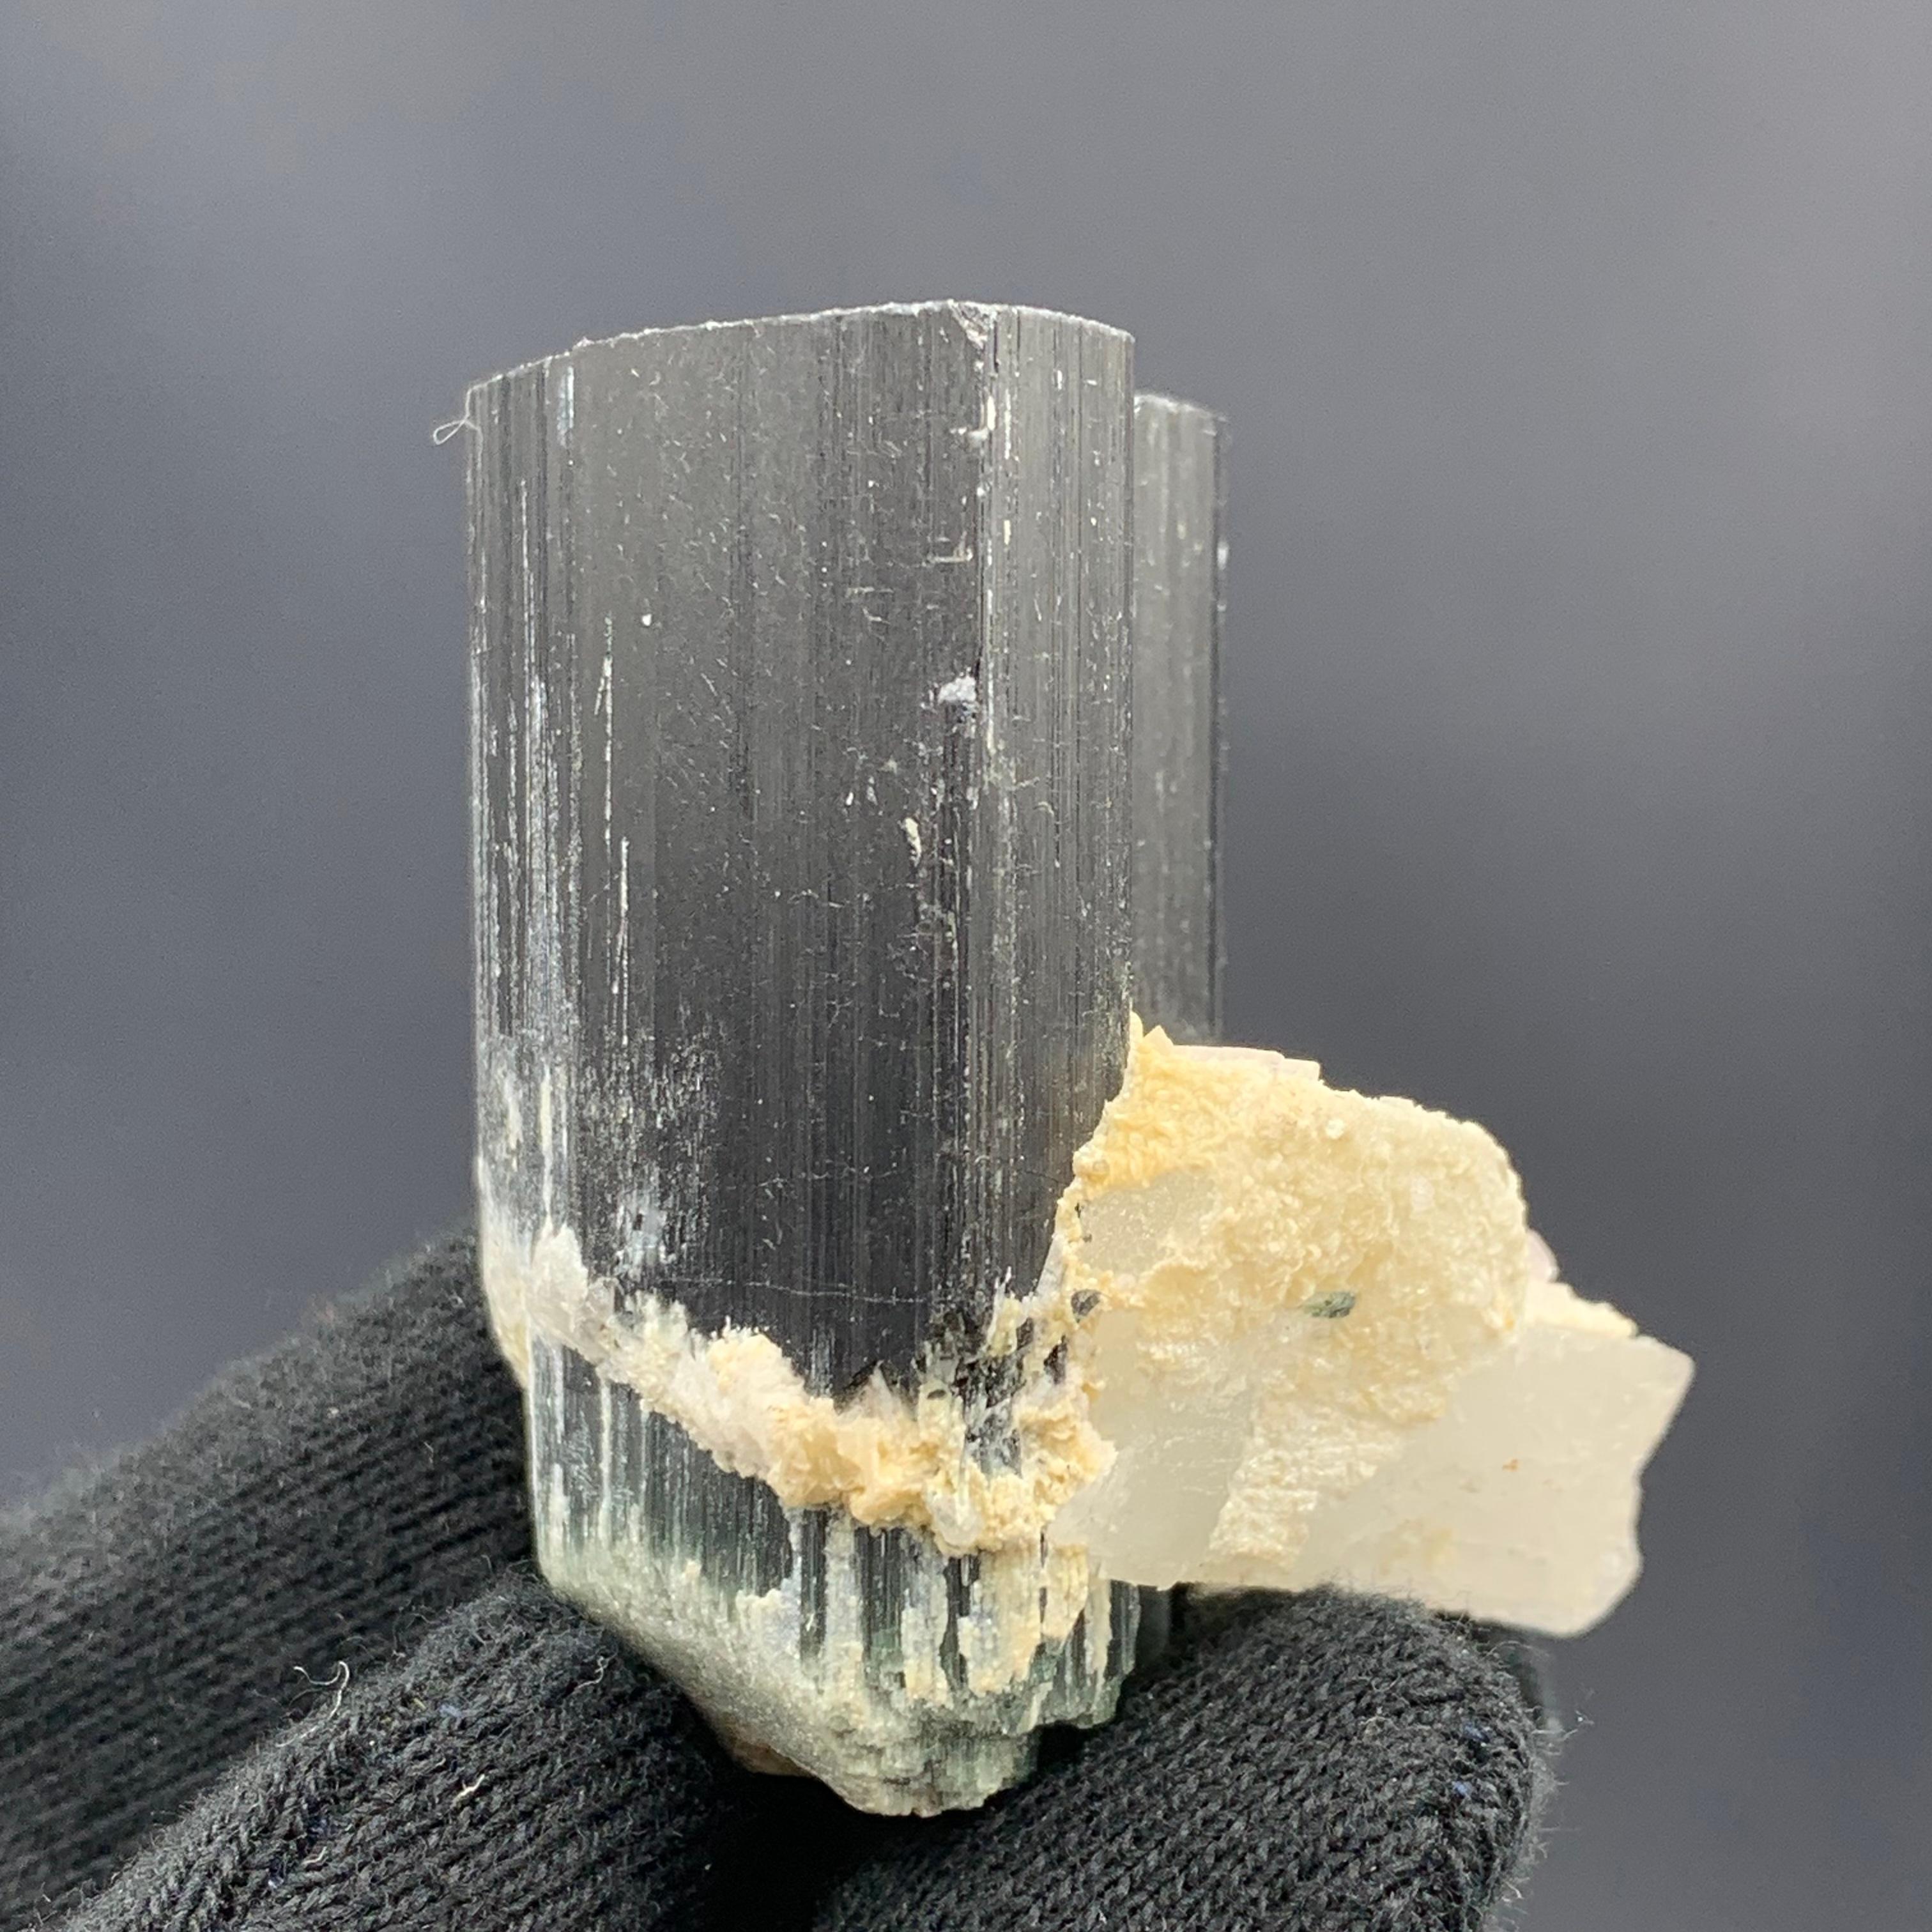 Gorgeous Black Tourmaline Lepidolite Specimen From Afghanistan 
Weight: 312.05 Carat 
Dimension : 4.4 x 2.8 x 3.1 cm 
Origin : Afghanistan

Tourmaline is a crystalline silicate mineral group in which boron is compounded with elements such as